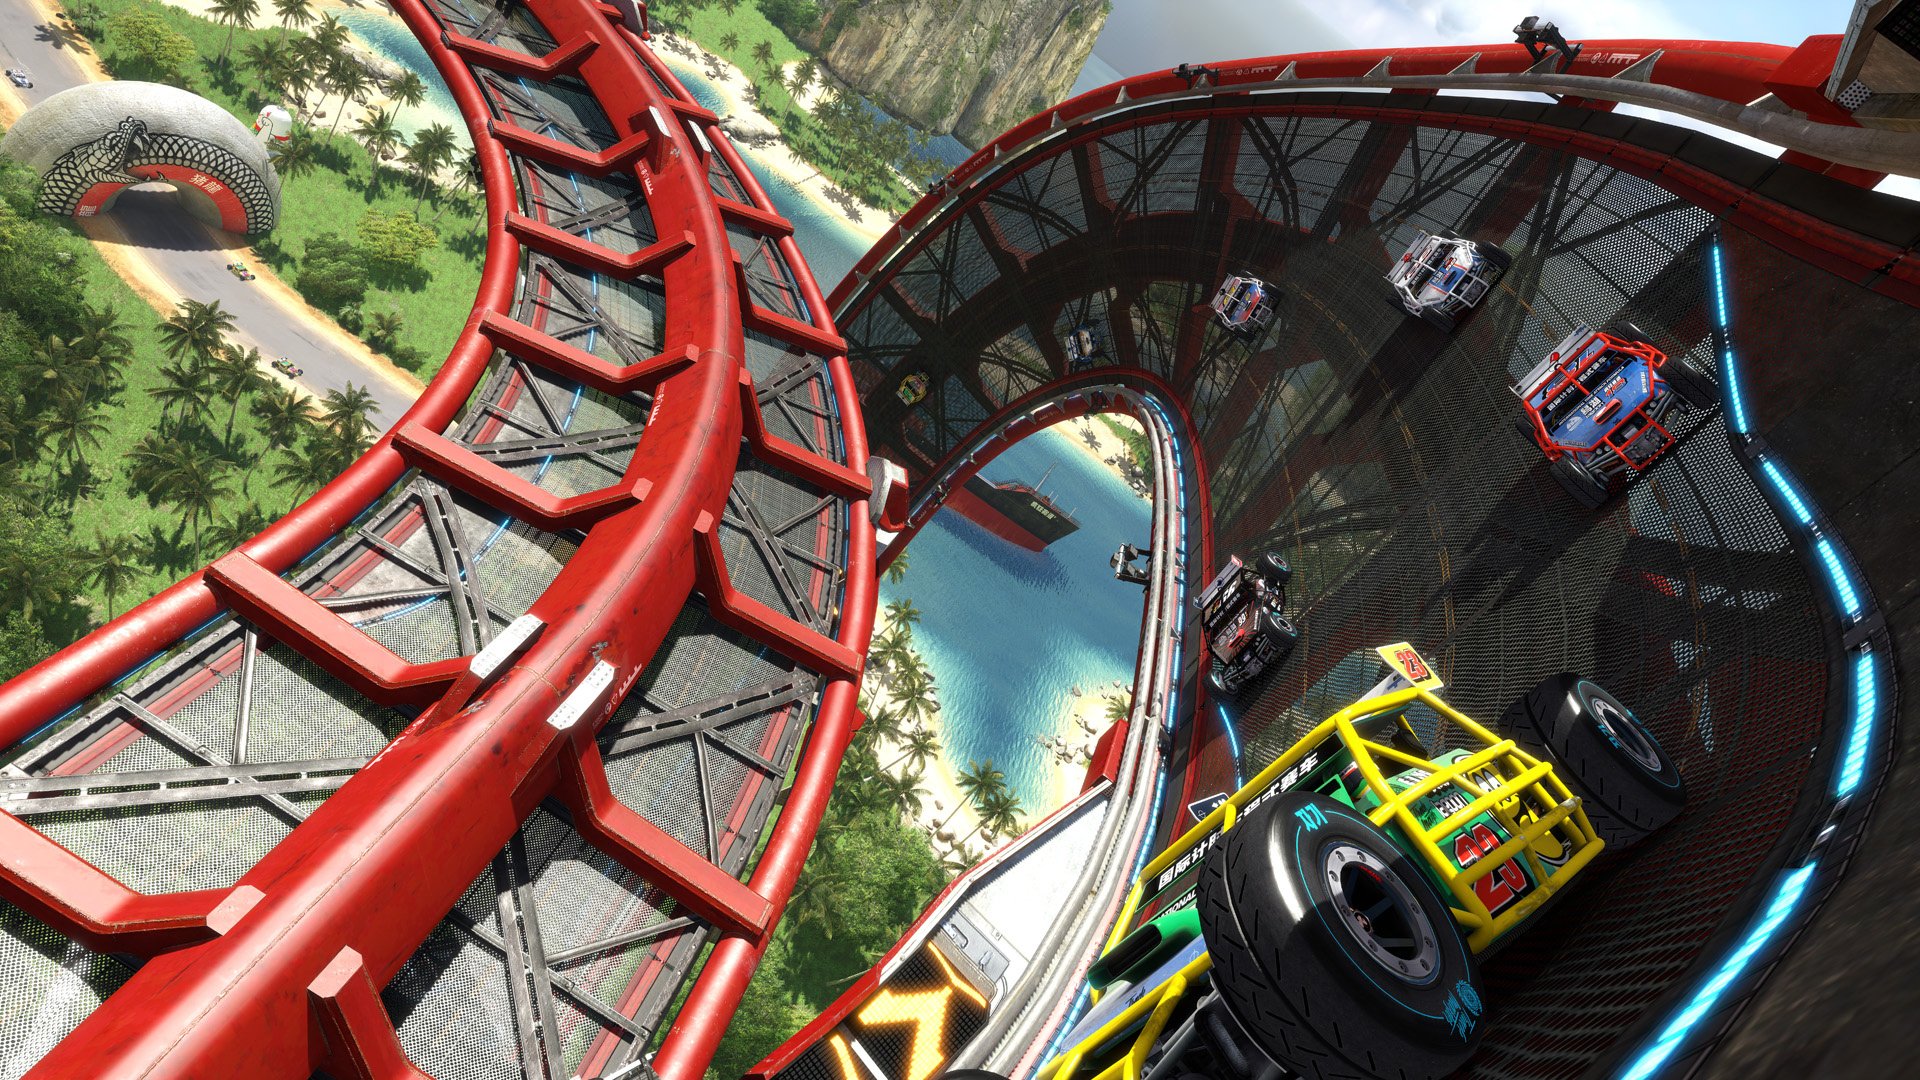 TrackMania: Turbo (PS4 / PlayStation 4) Game Profile | News, Reviews